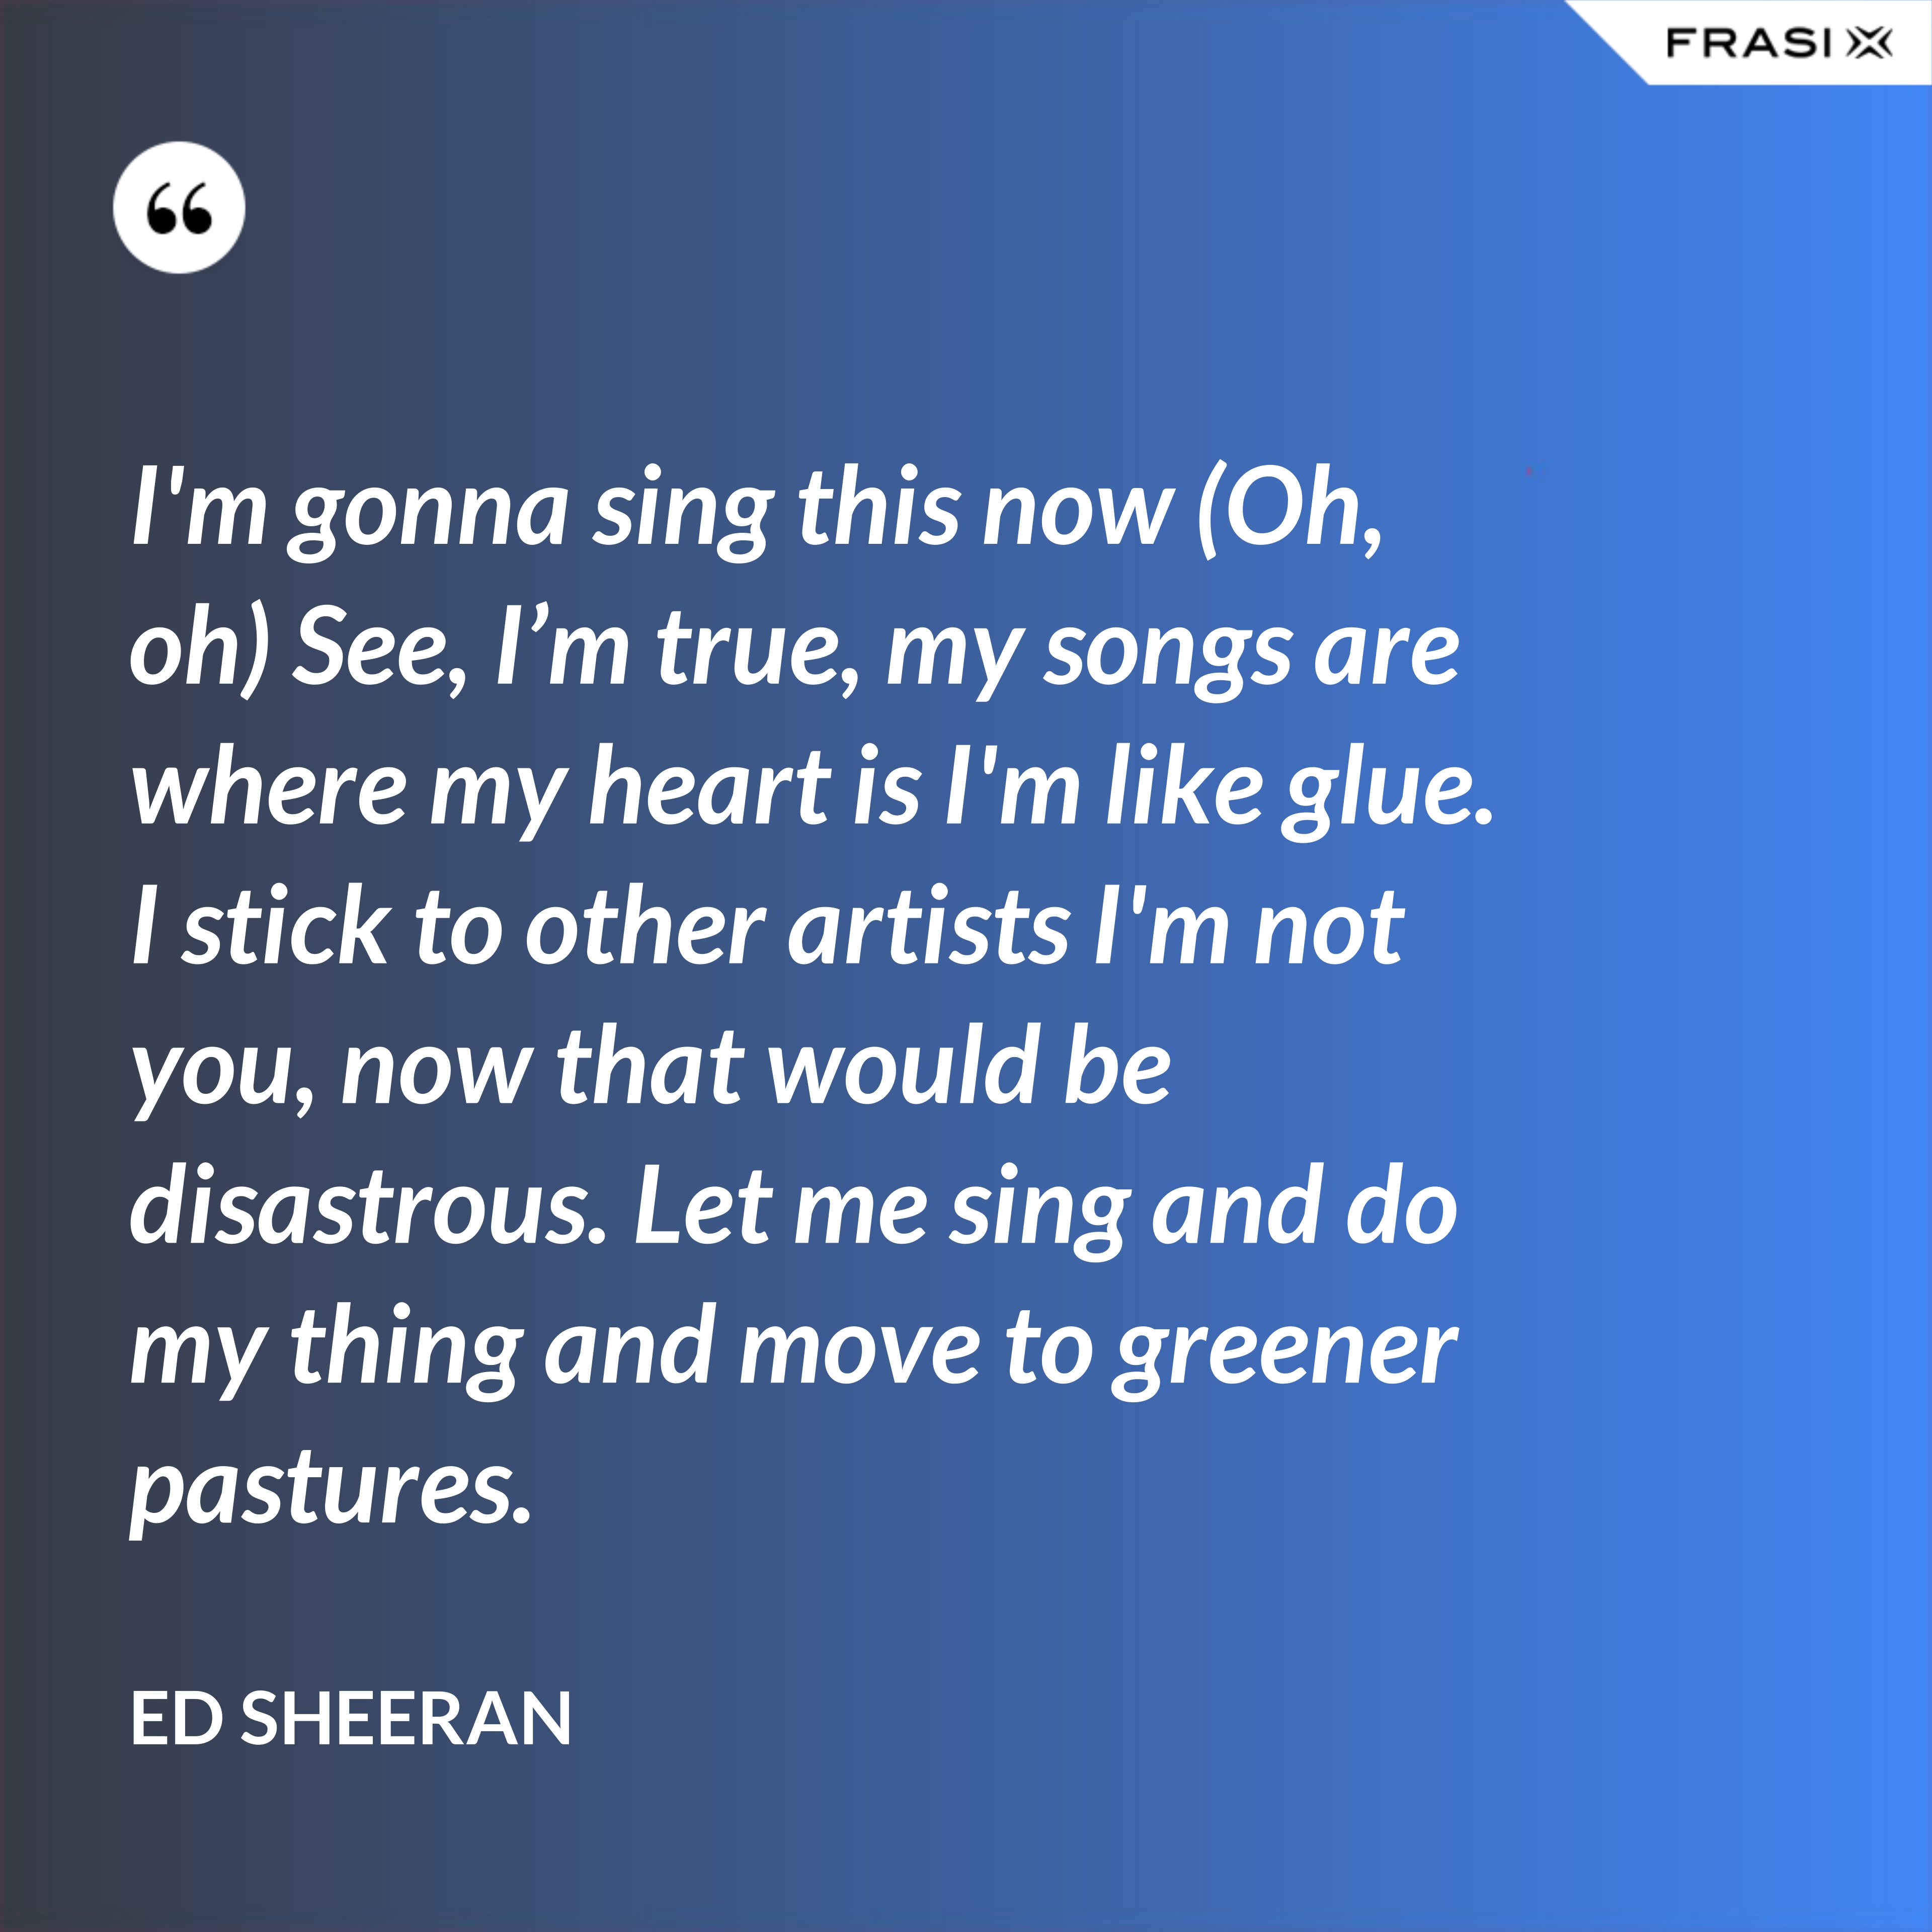 I'm gonna sing this now (Oh, oh) See, I’m true, my songs are where my heart is I'm like glue. I stick to other artists I'm not you, now that would be disastrous. Let me sing and do my thing and move to greener pastures. - Ed Sheeran